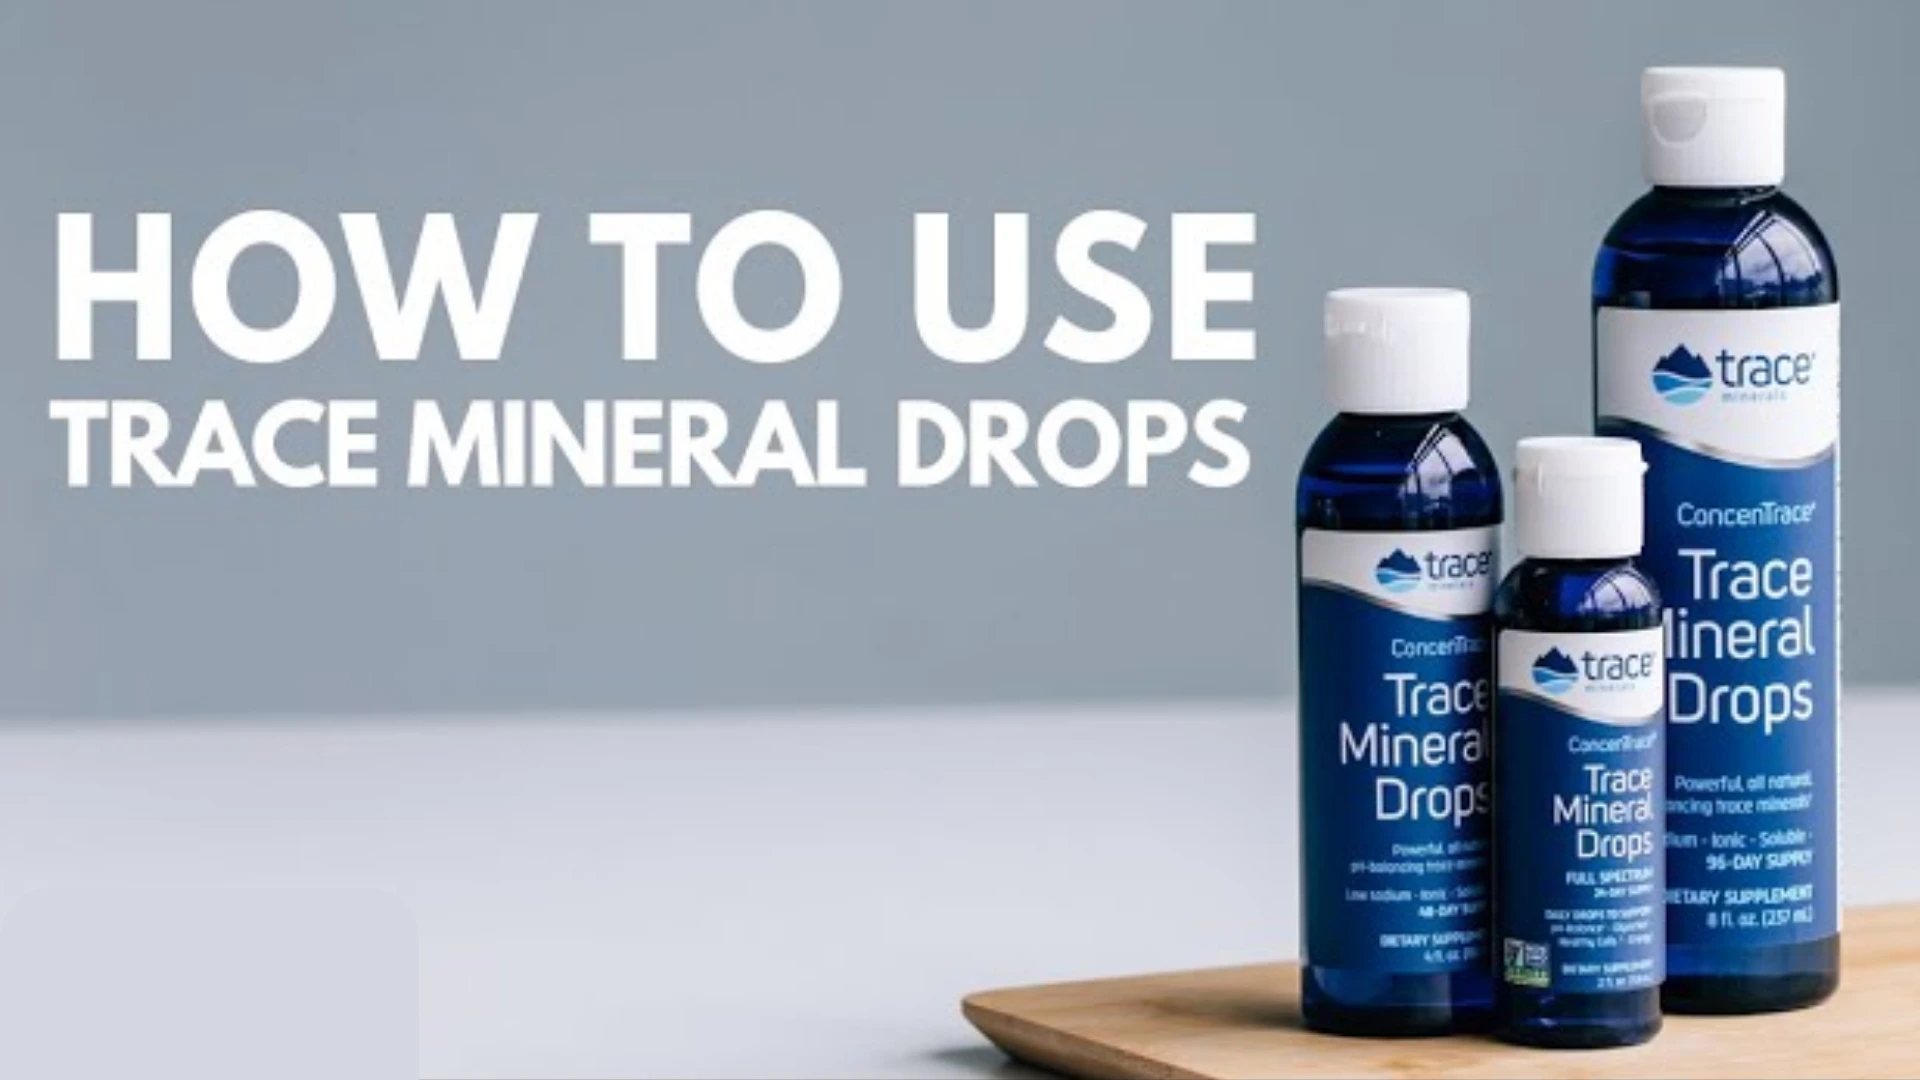 How to Use Trace Mineral Drops